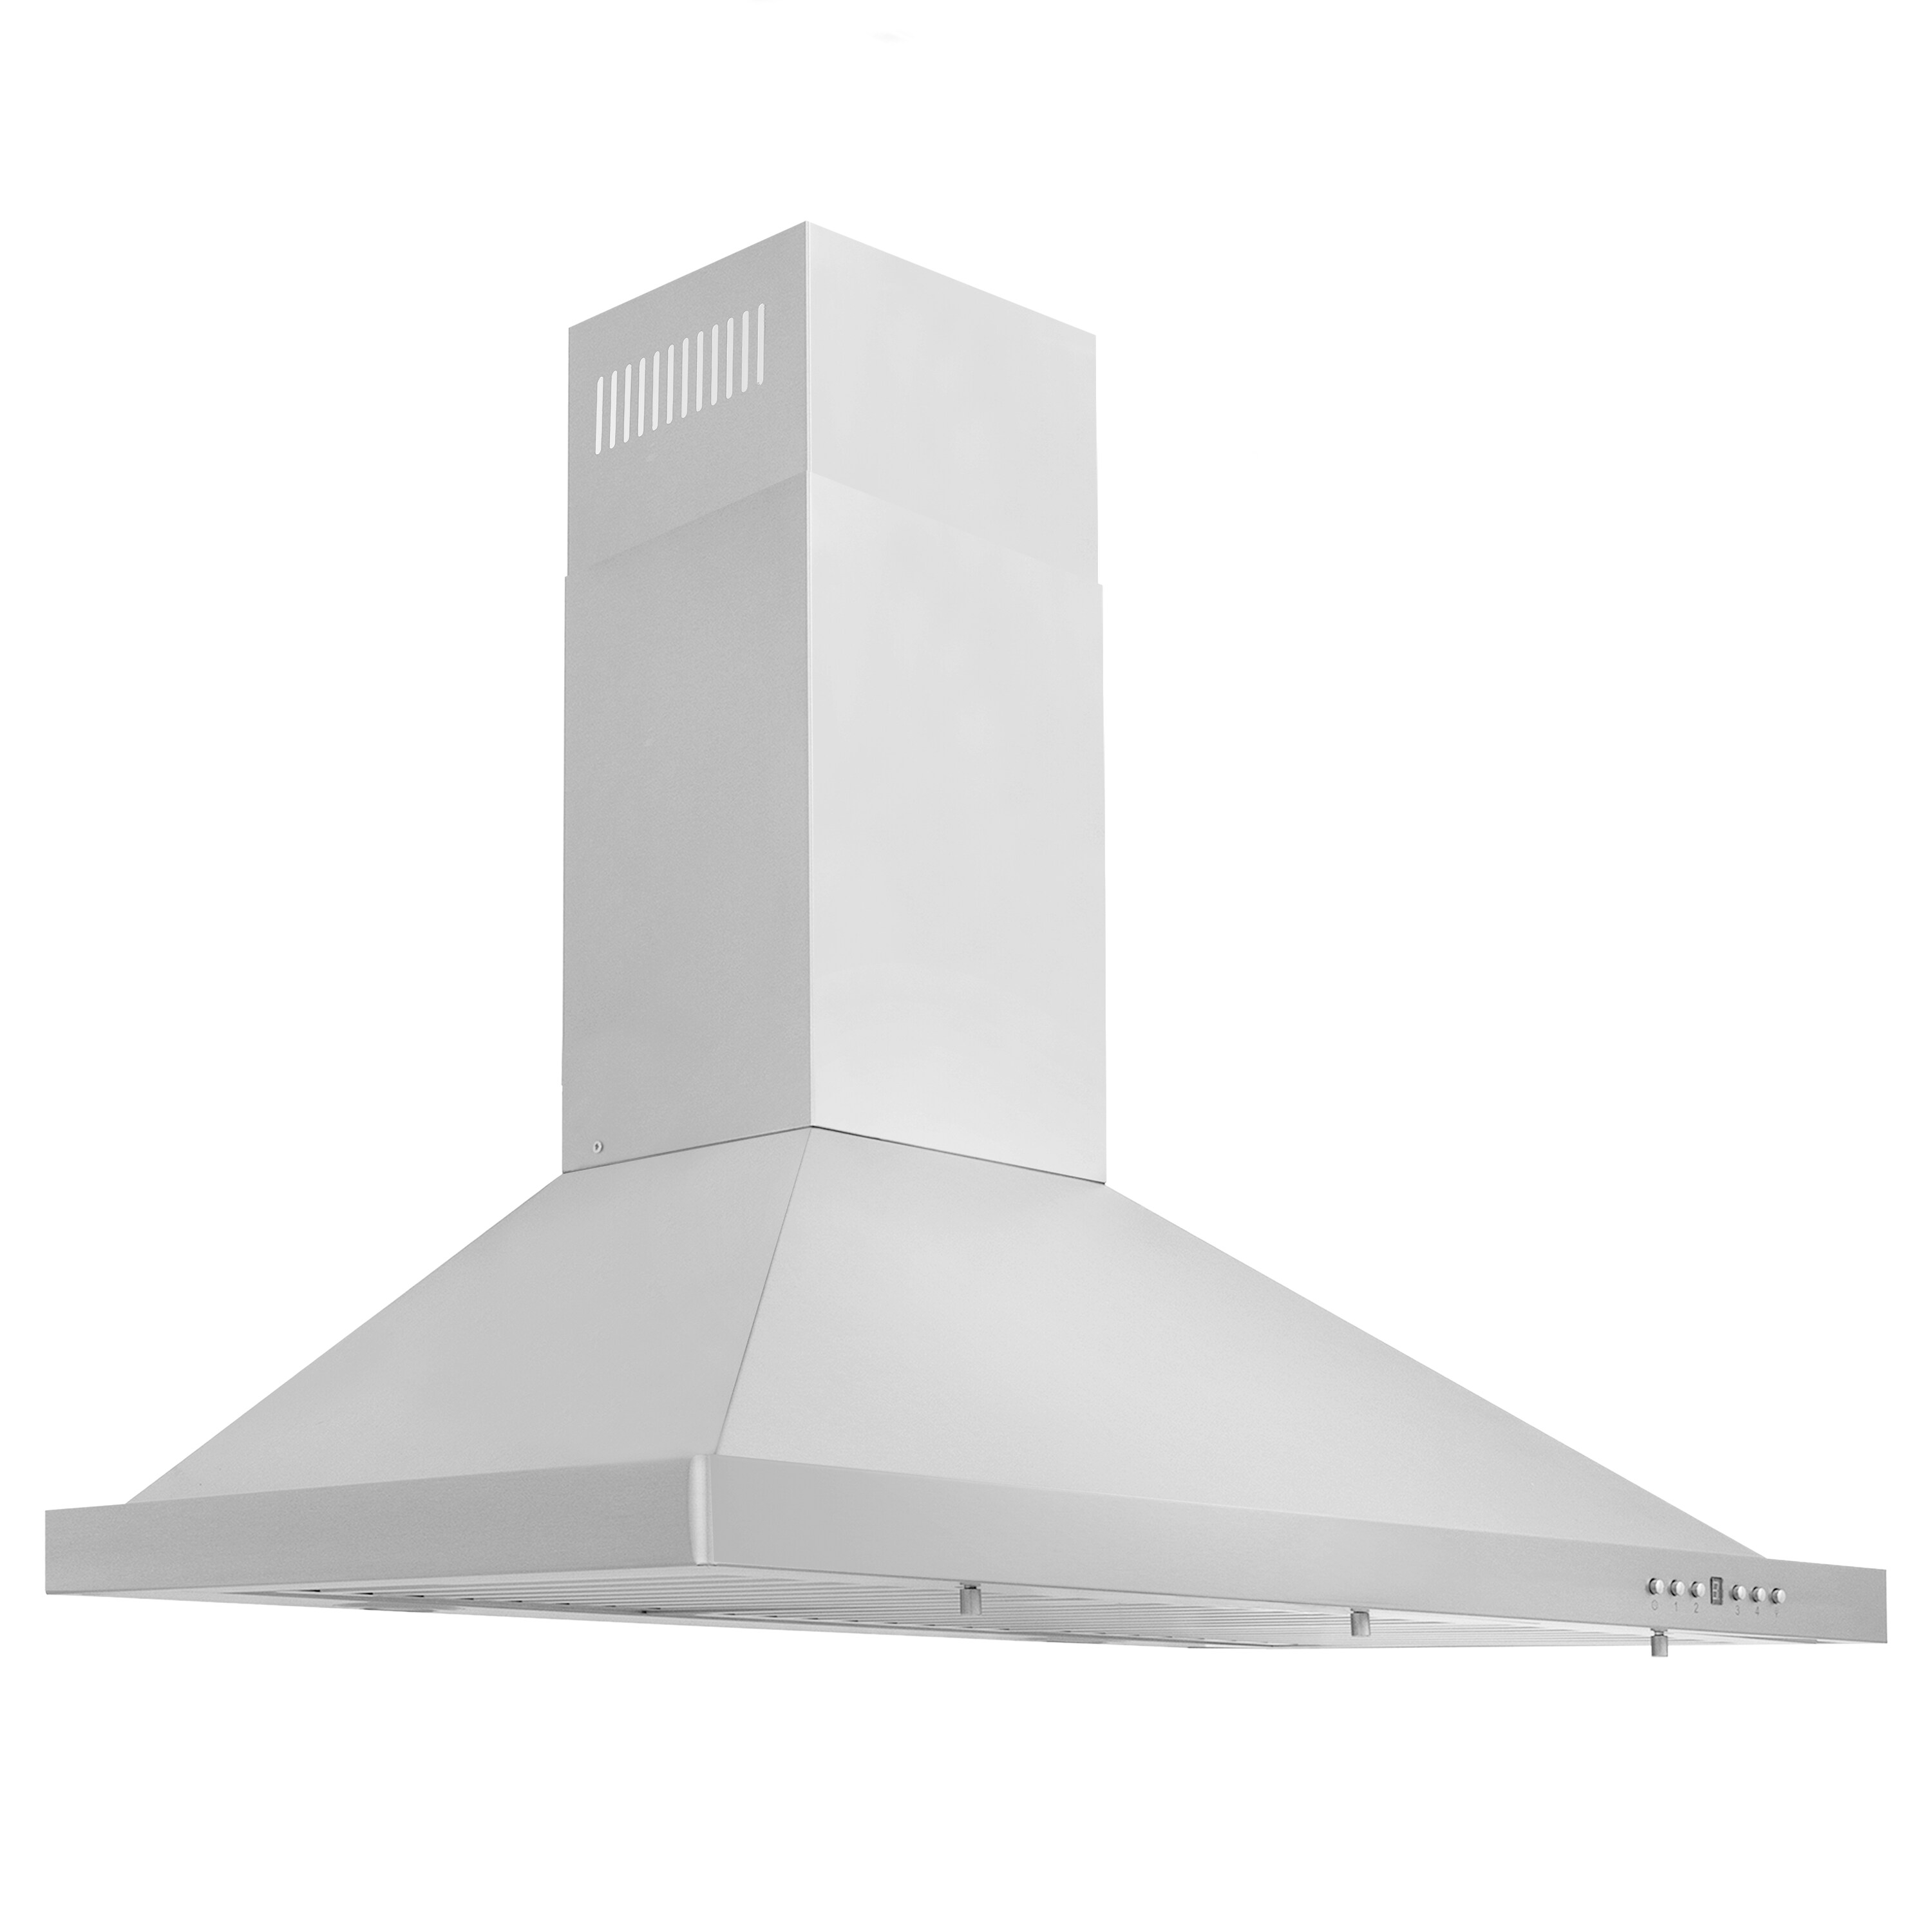 Cycene 36 Inch Professional Series Under Cabinet Stainless Steel Range Hood w/Baffle Filter @ 900CFM CY-RH15PS-36 